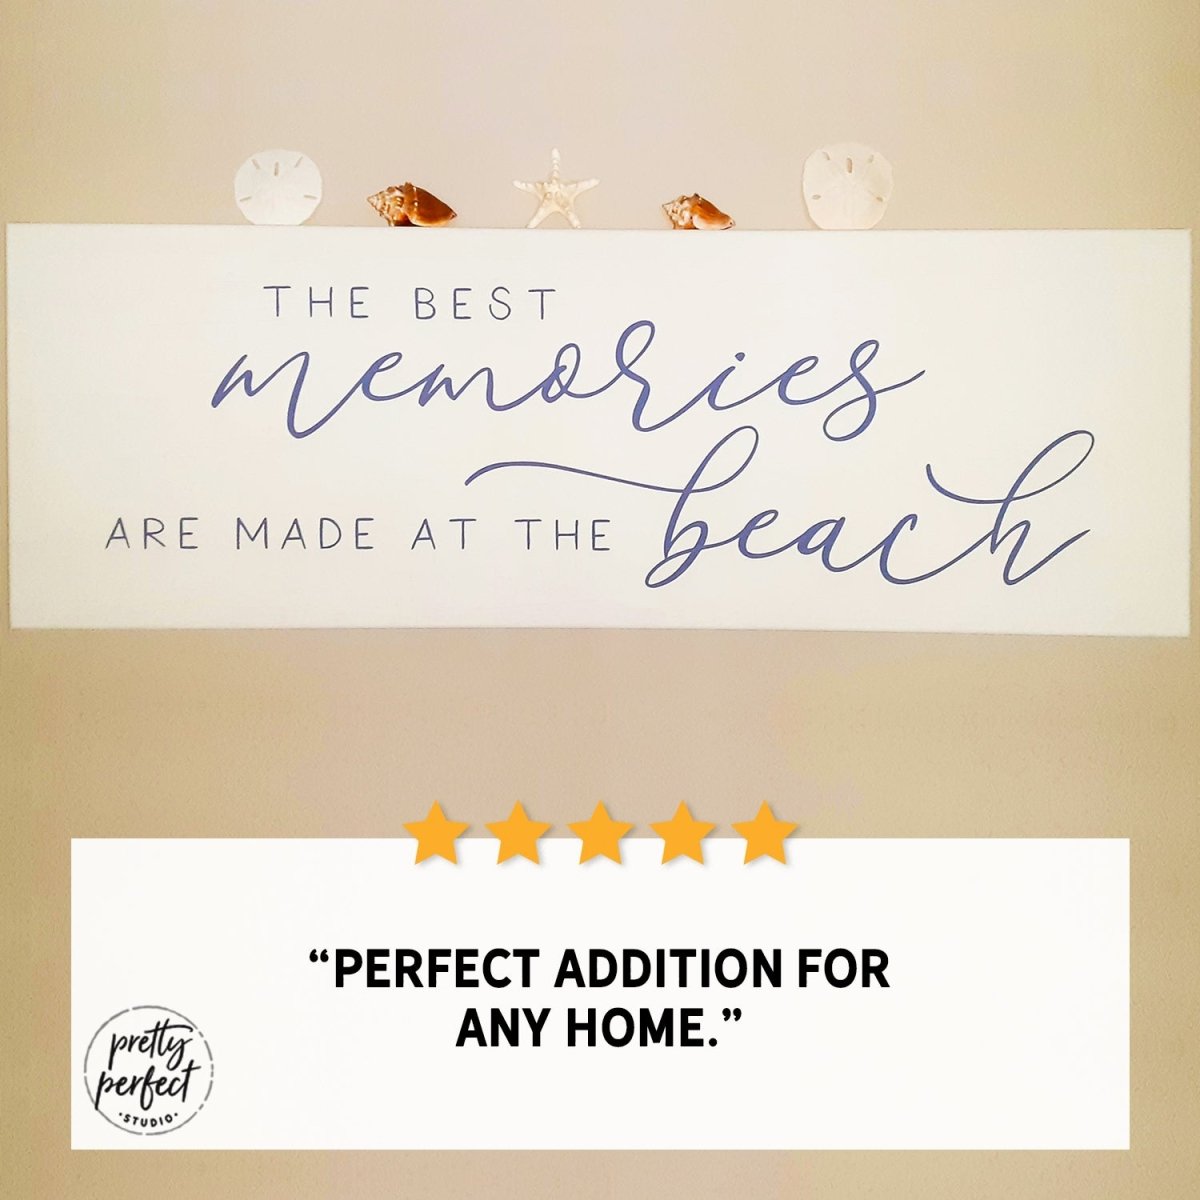 Customer product review for the best memories are made at the beach wall art by Pretty Perfect Studio